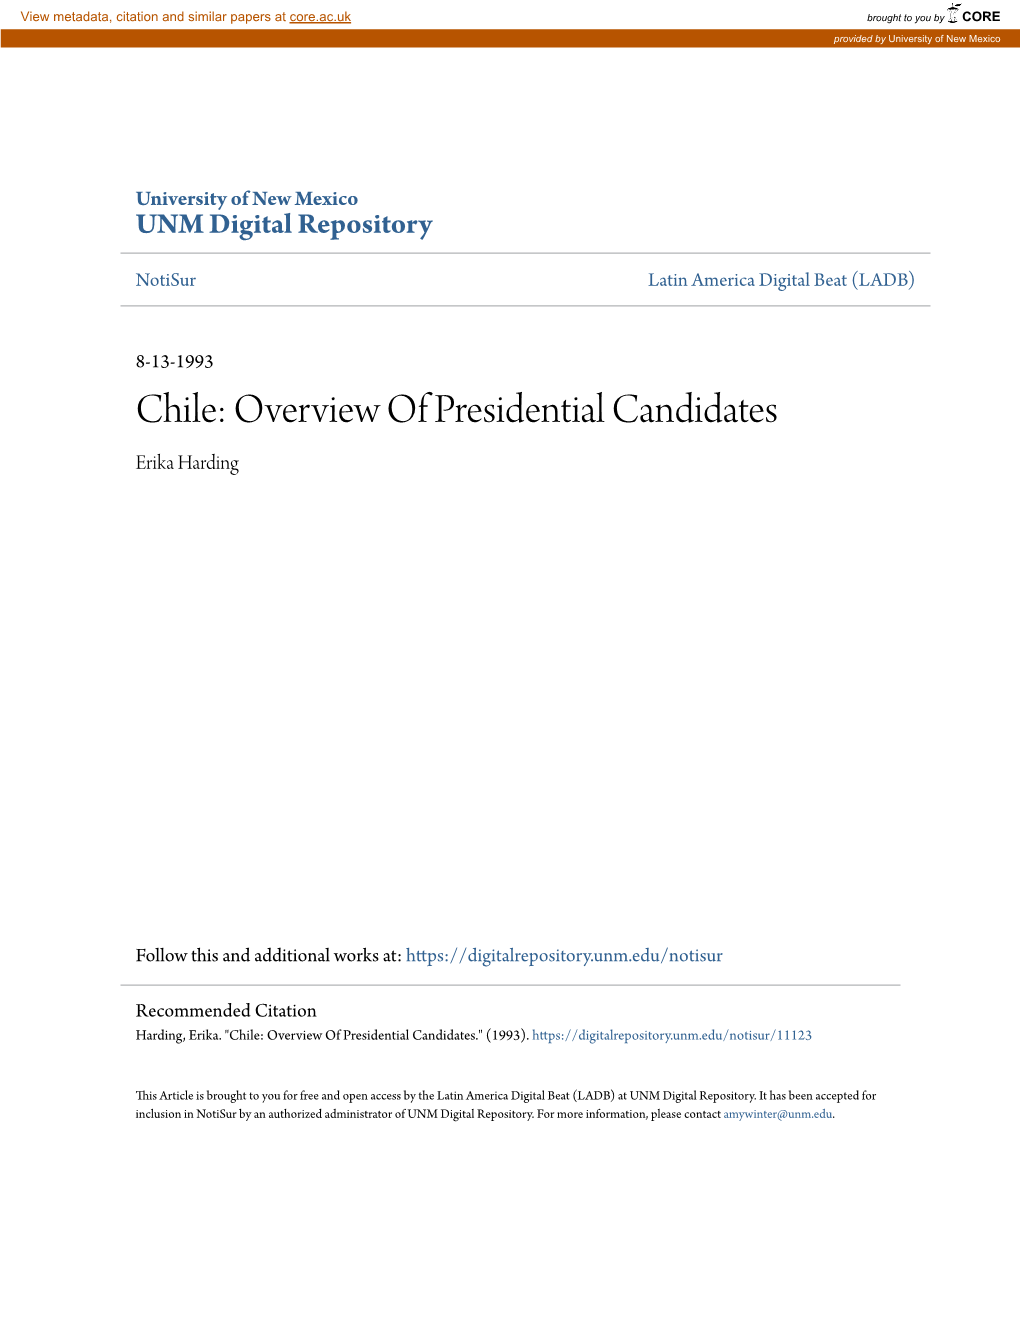 Chile: Overview of Presidential Candidates Erika Harding